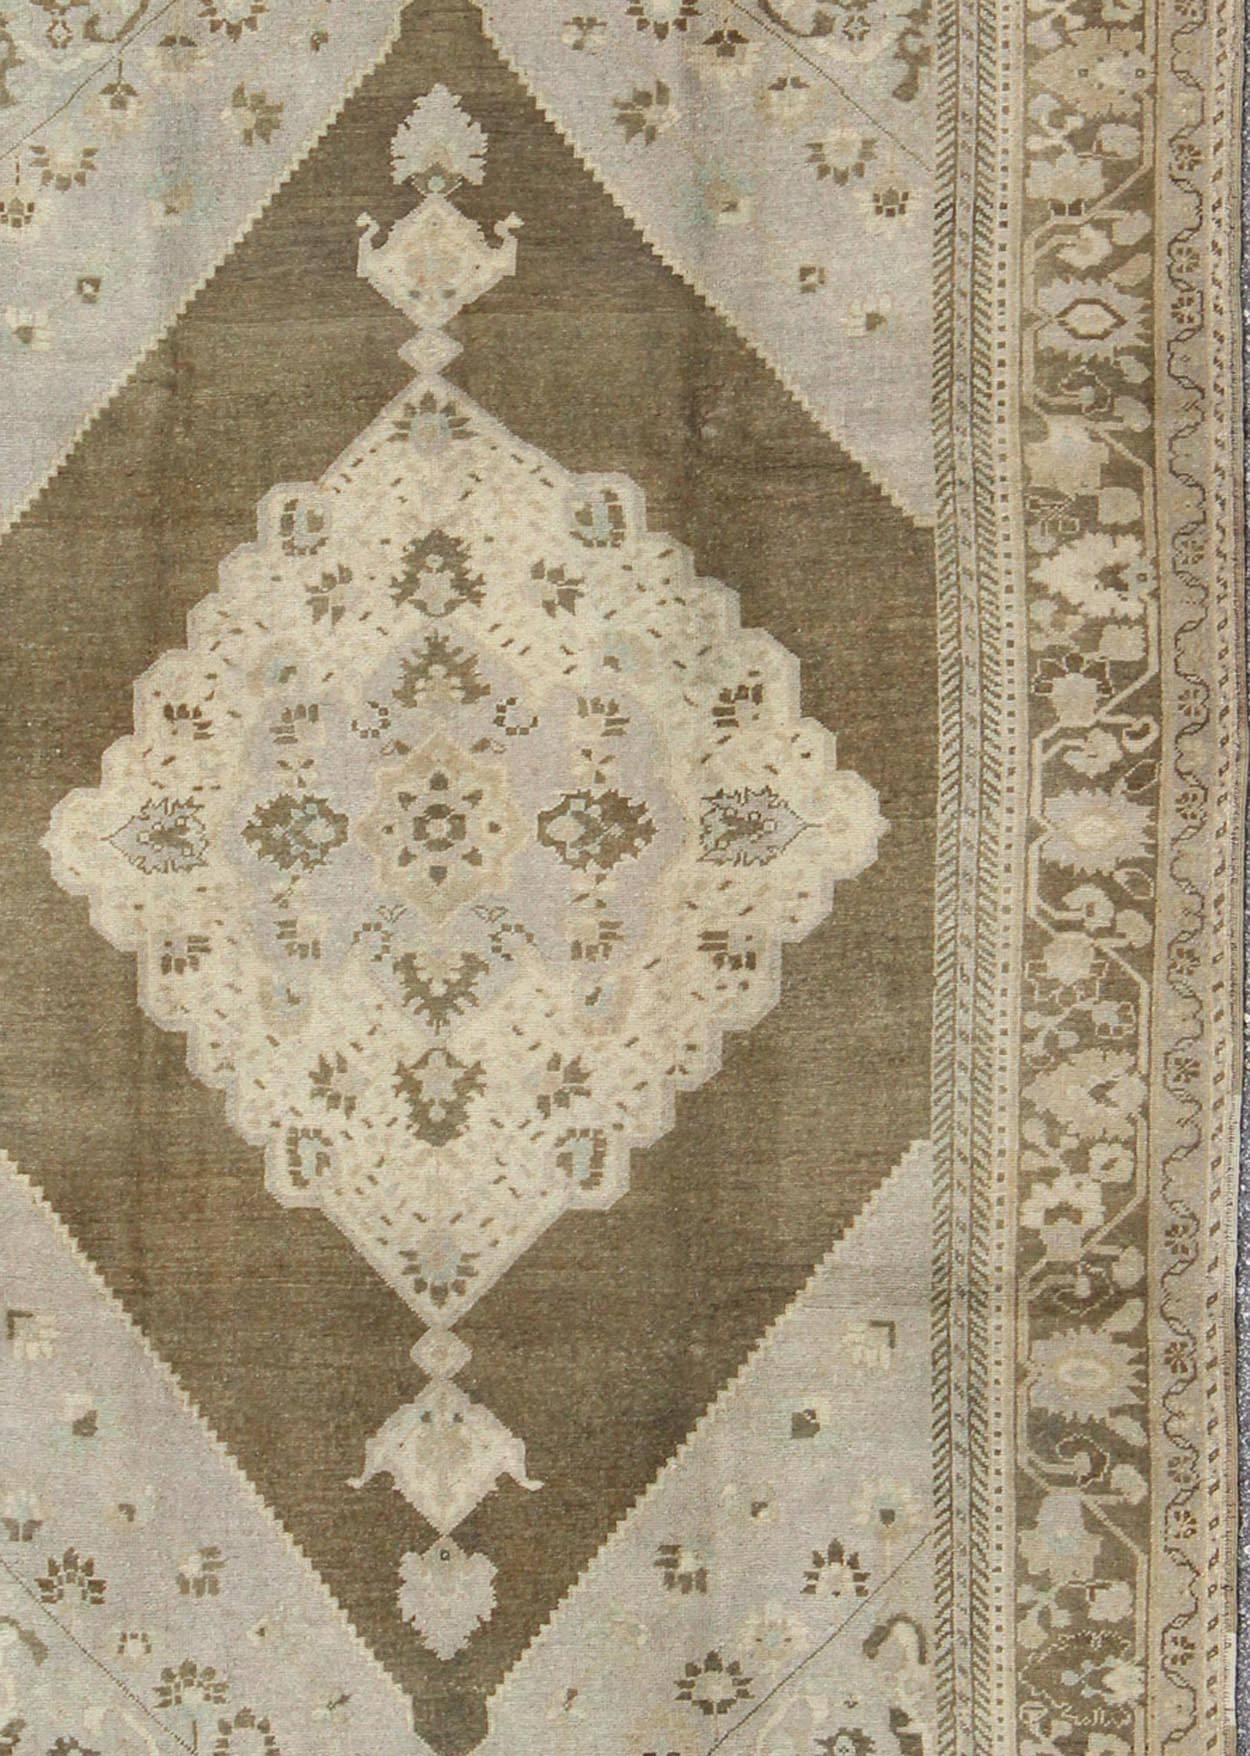 Medallion Design Vintage Turkish Oushak Rug in Nude, Taupe, and Brown In Good Condition For Sale In Atlanta, GA